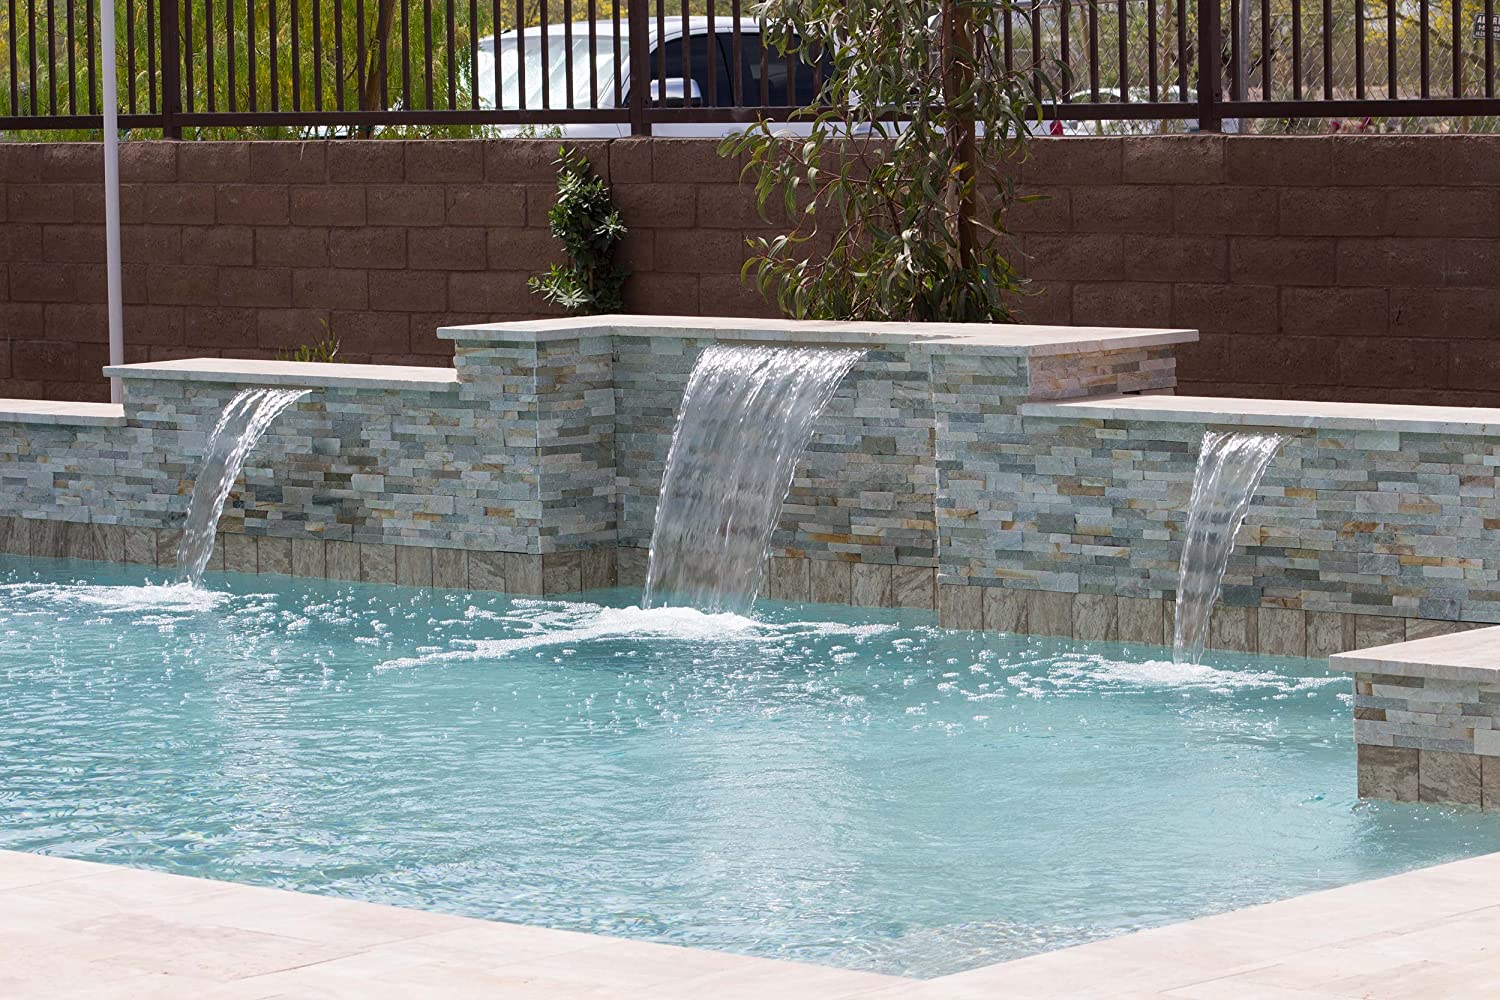 Want to lower swimming pool chlorine demand AND evaporation?